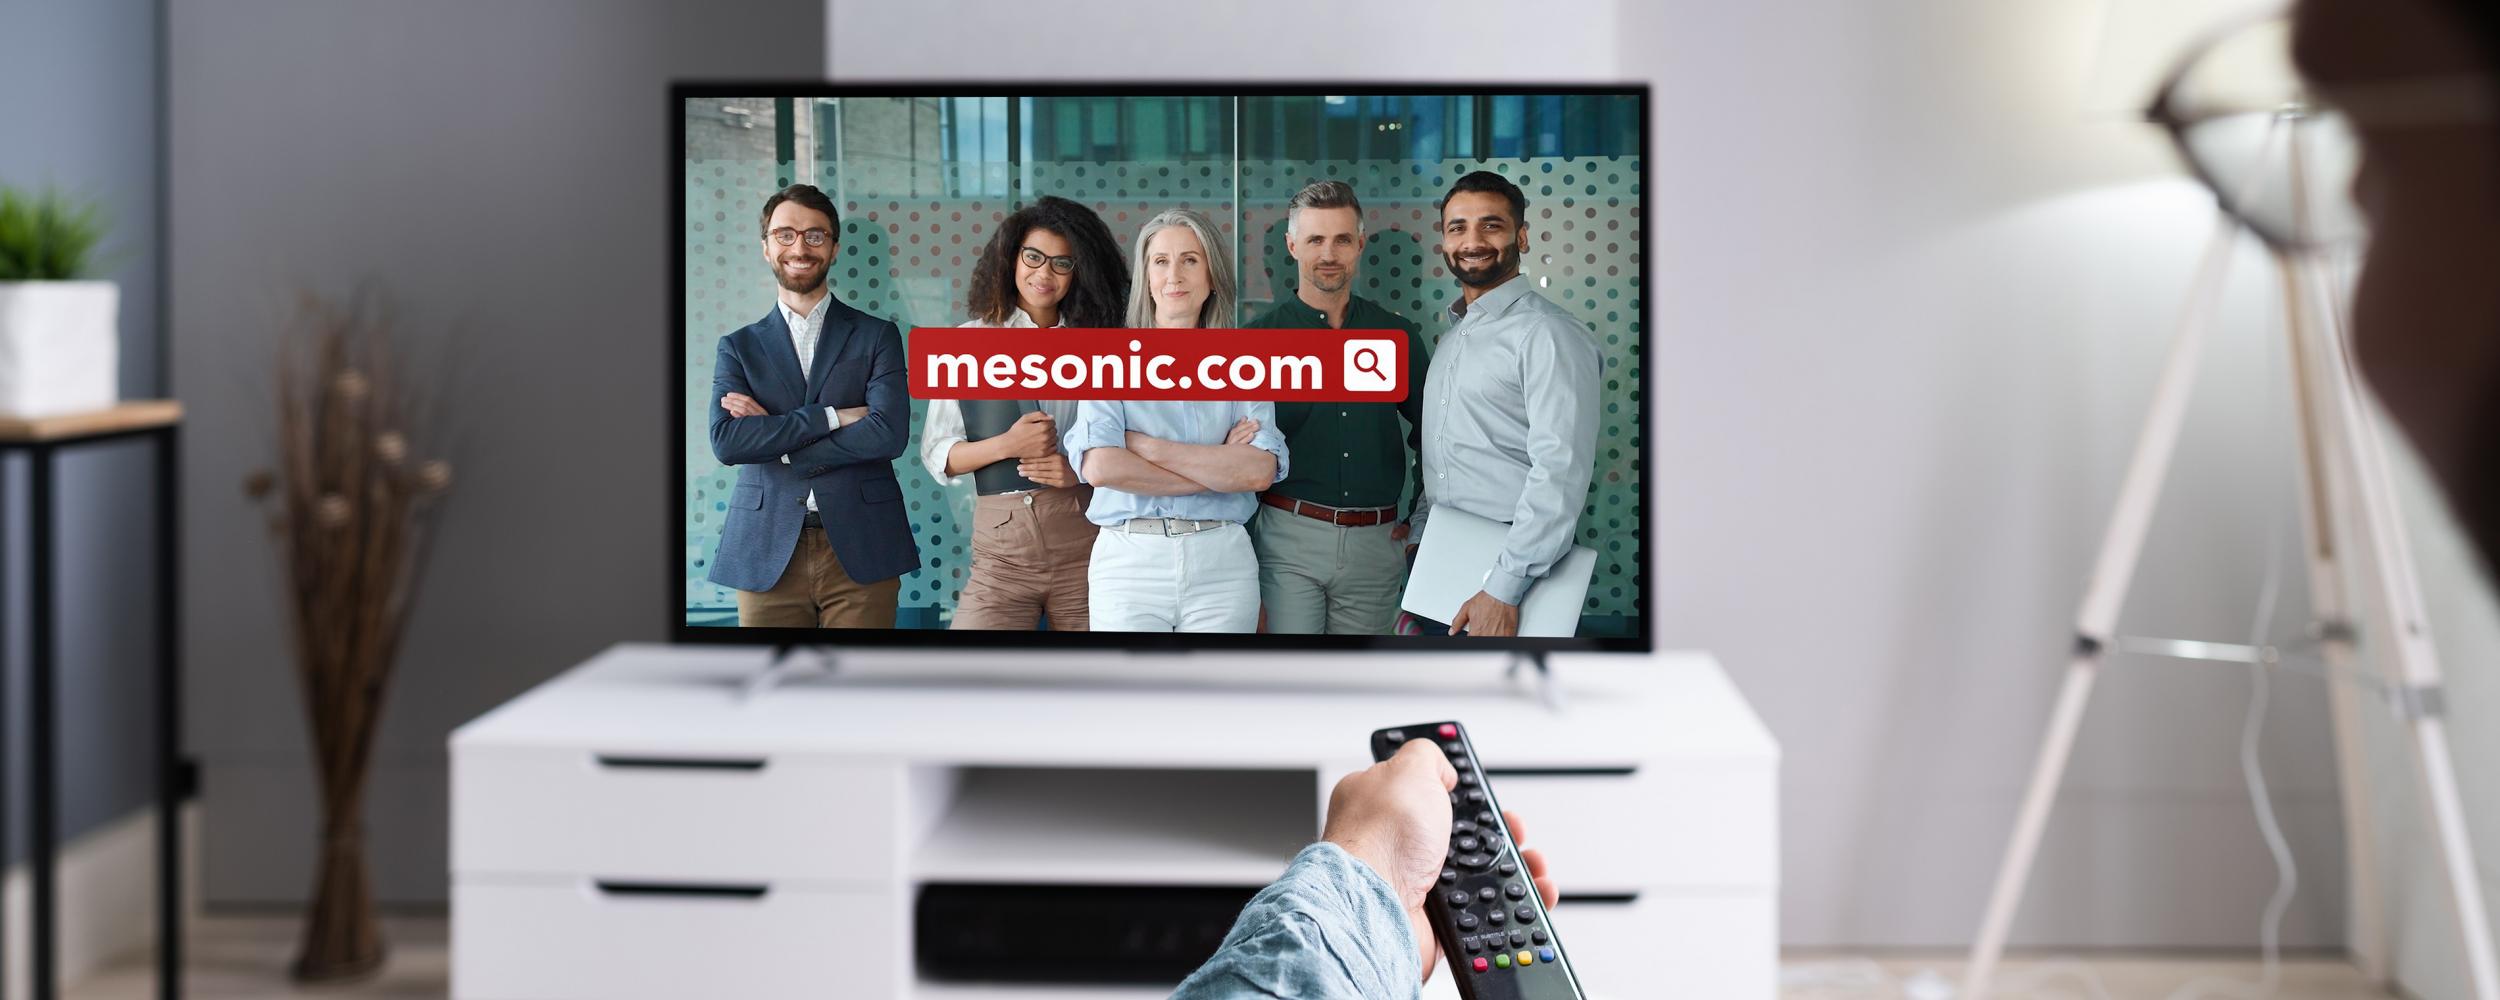 mesonic TV commercial on television